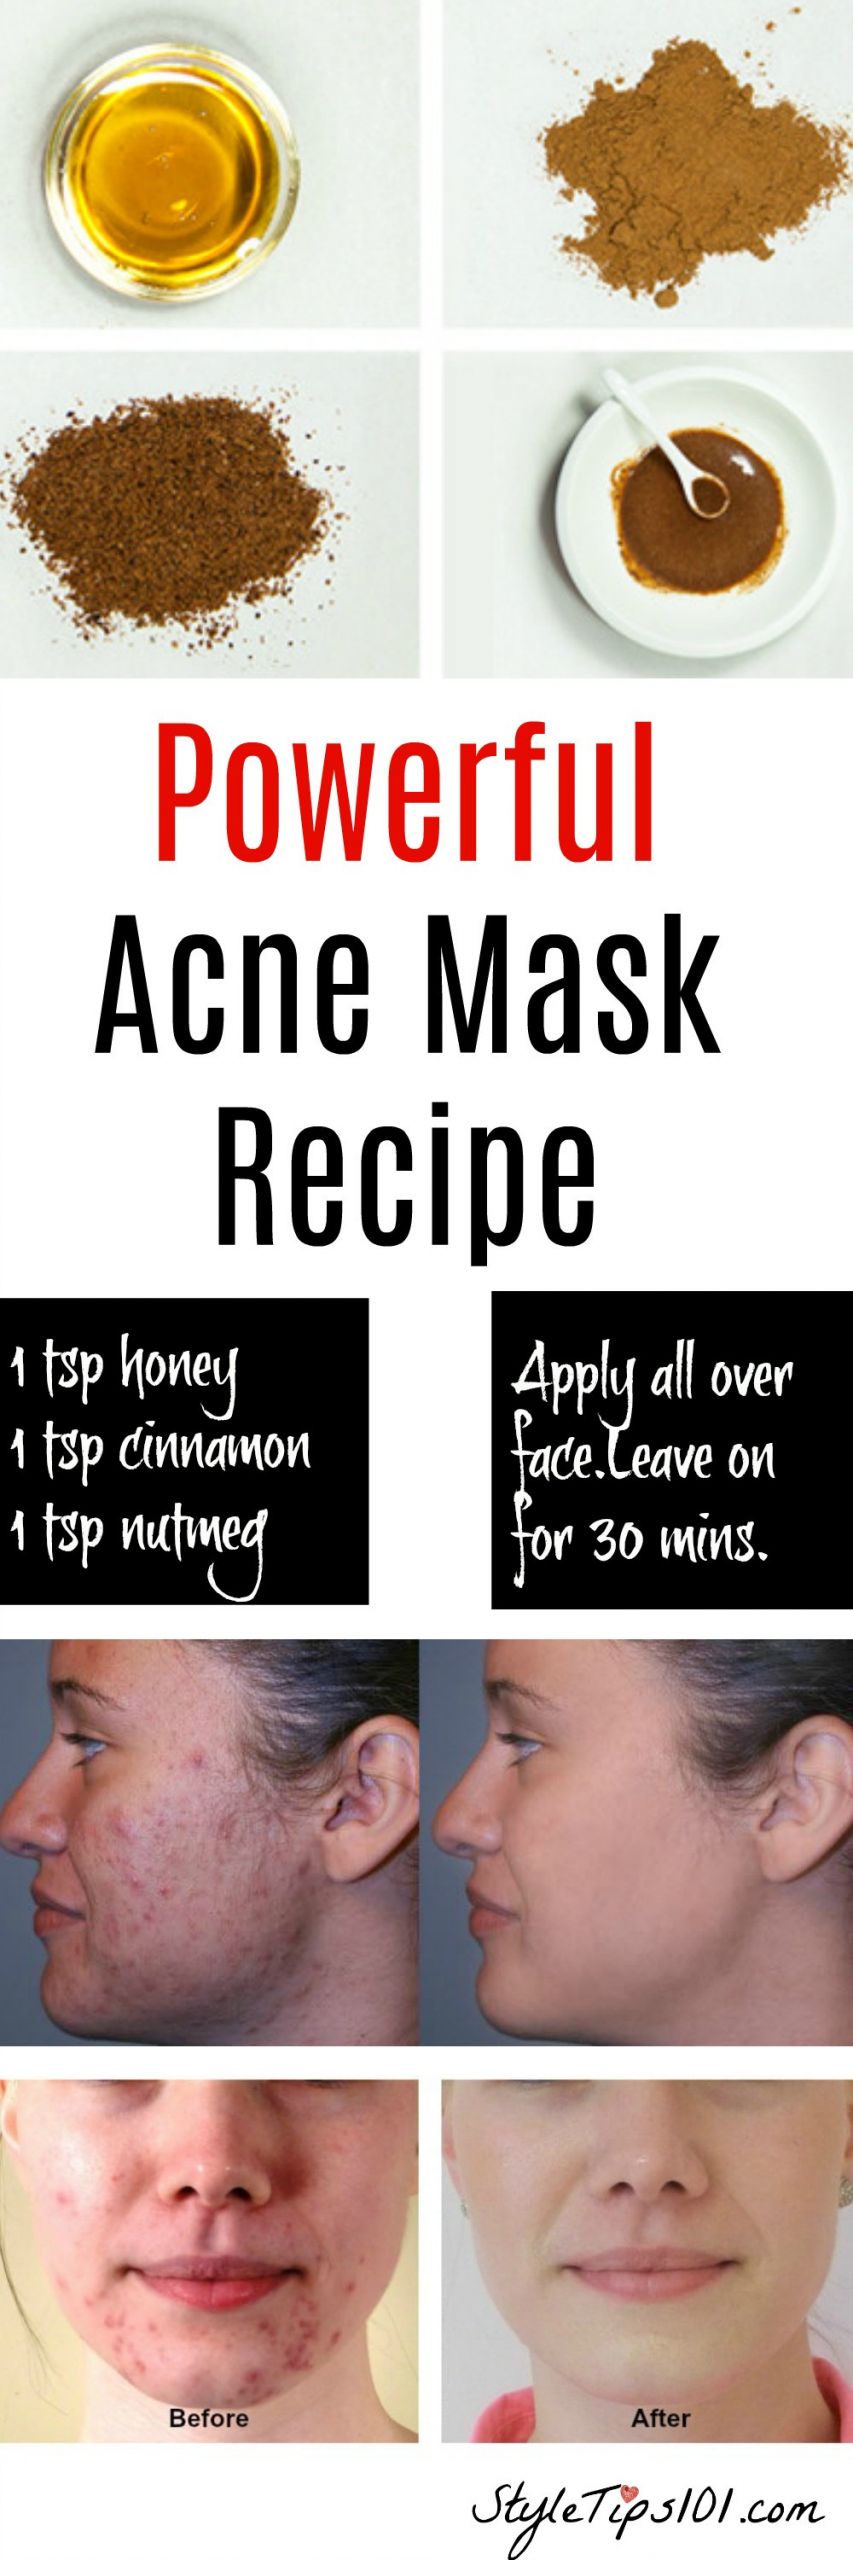 DIY Face Mask For Pimples
 Homemade Natural Acne Mask